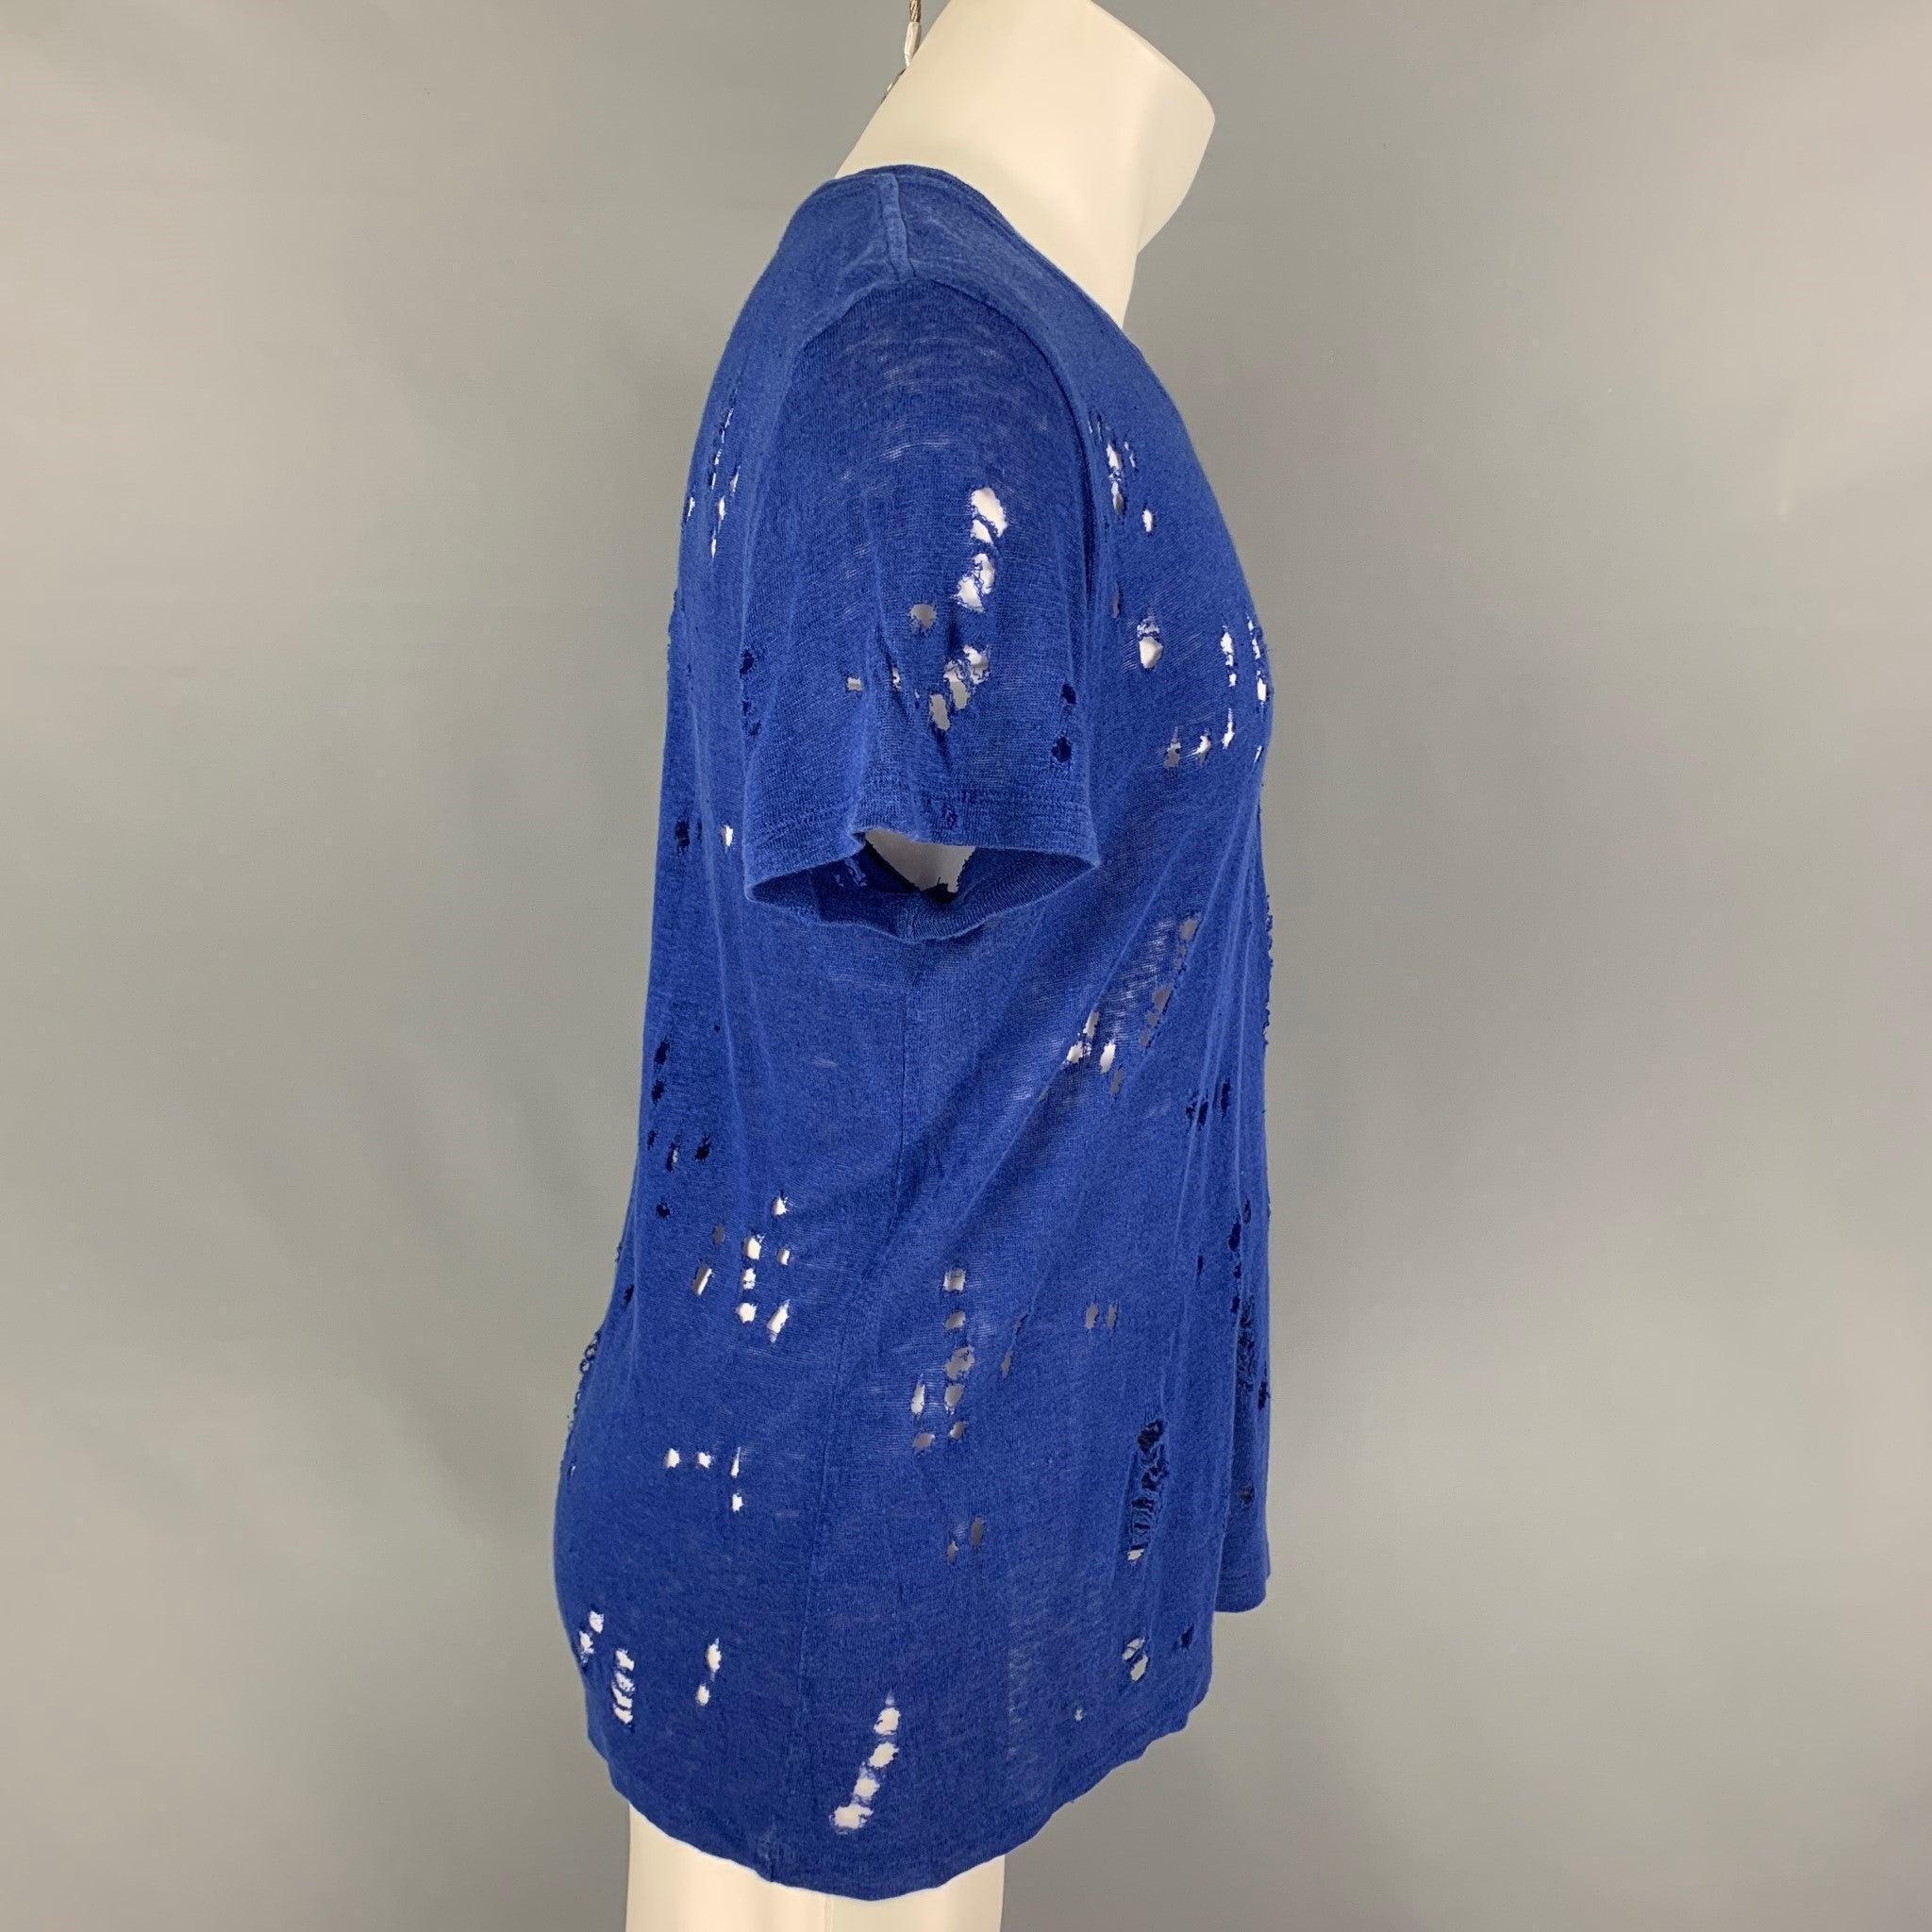 IRO 'Clay' t-shirt comes in a royal blue linen featuring distressed details throughout and a crew-neck. Made in Portugal.
Very Good Pre-Owned Condition.  

Marked:   S 

Measurements: 
 
Shoulder: 18 inches  Chest: 38 inches  Sleeve: 8 inches